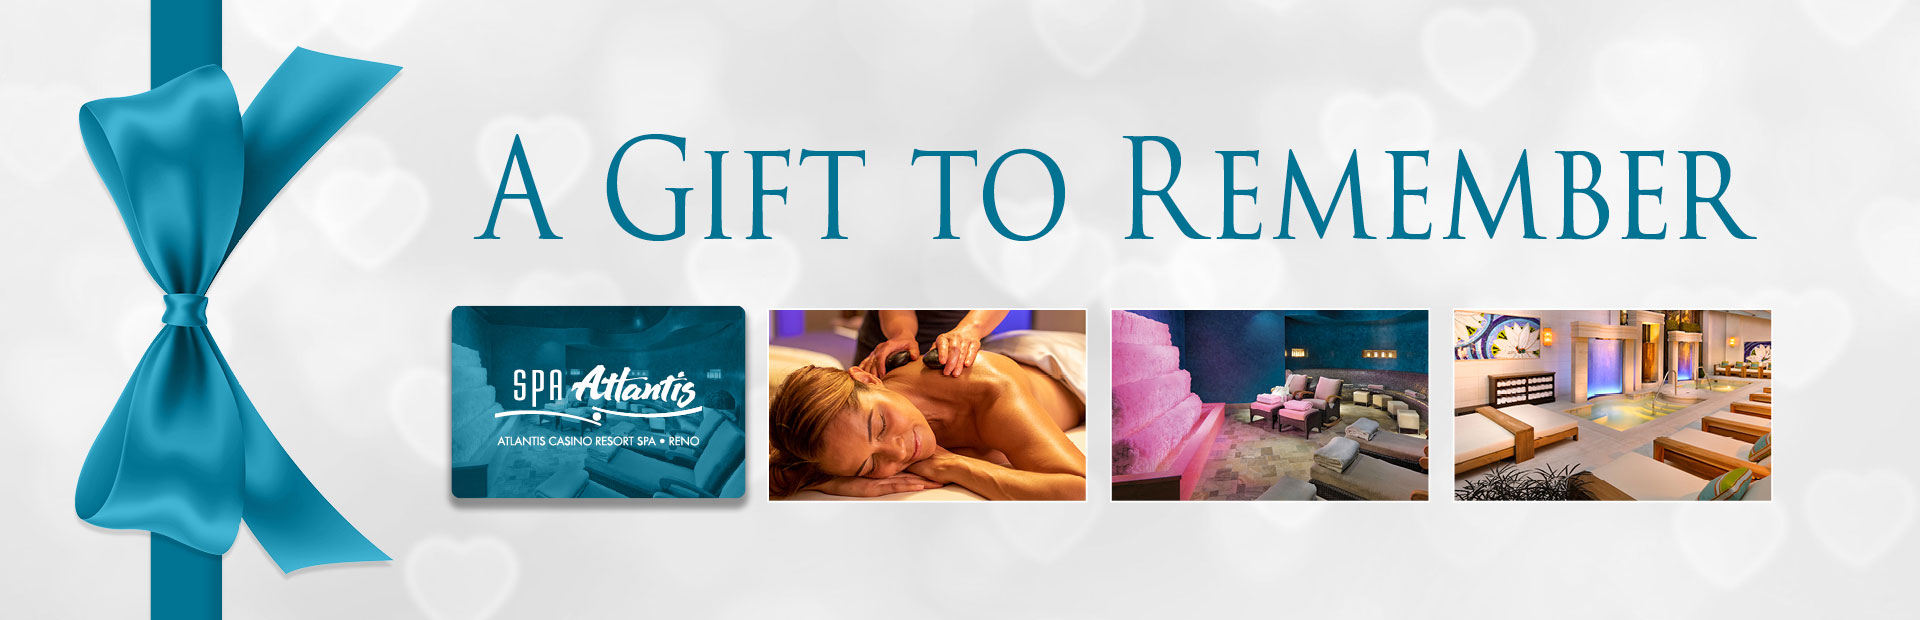 Valentine's Day Spa Gift Cards